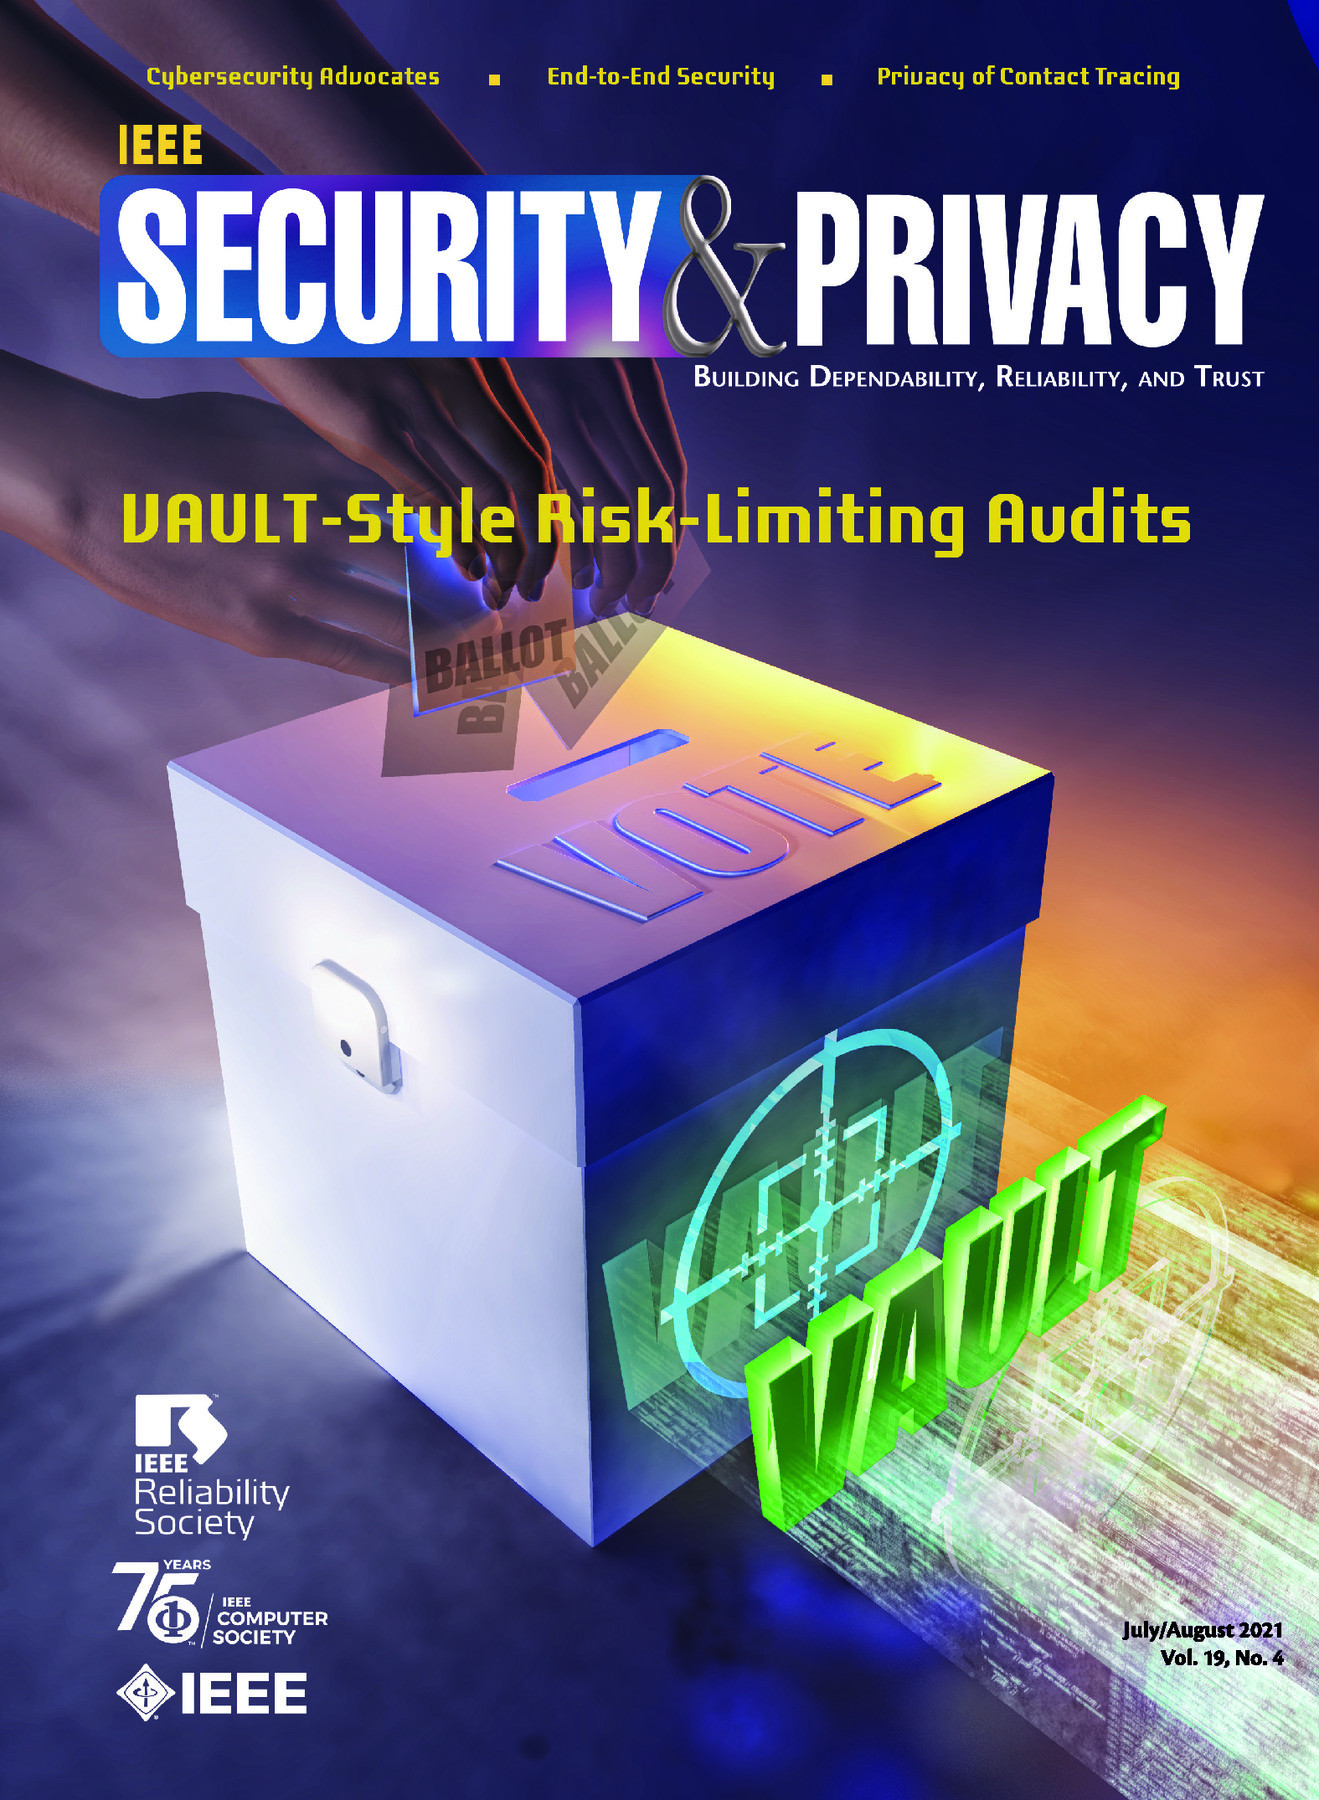 IEEE Security & Privacy July/August 2021 Vol. 19 No. 4